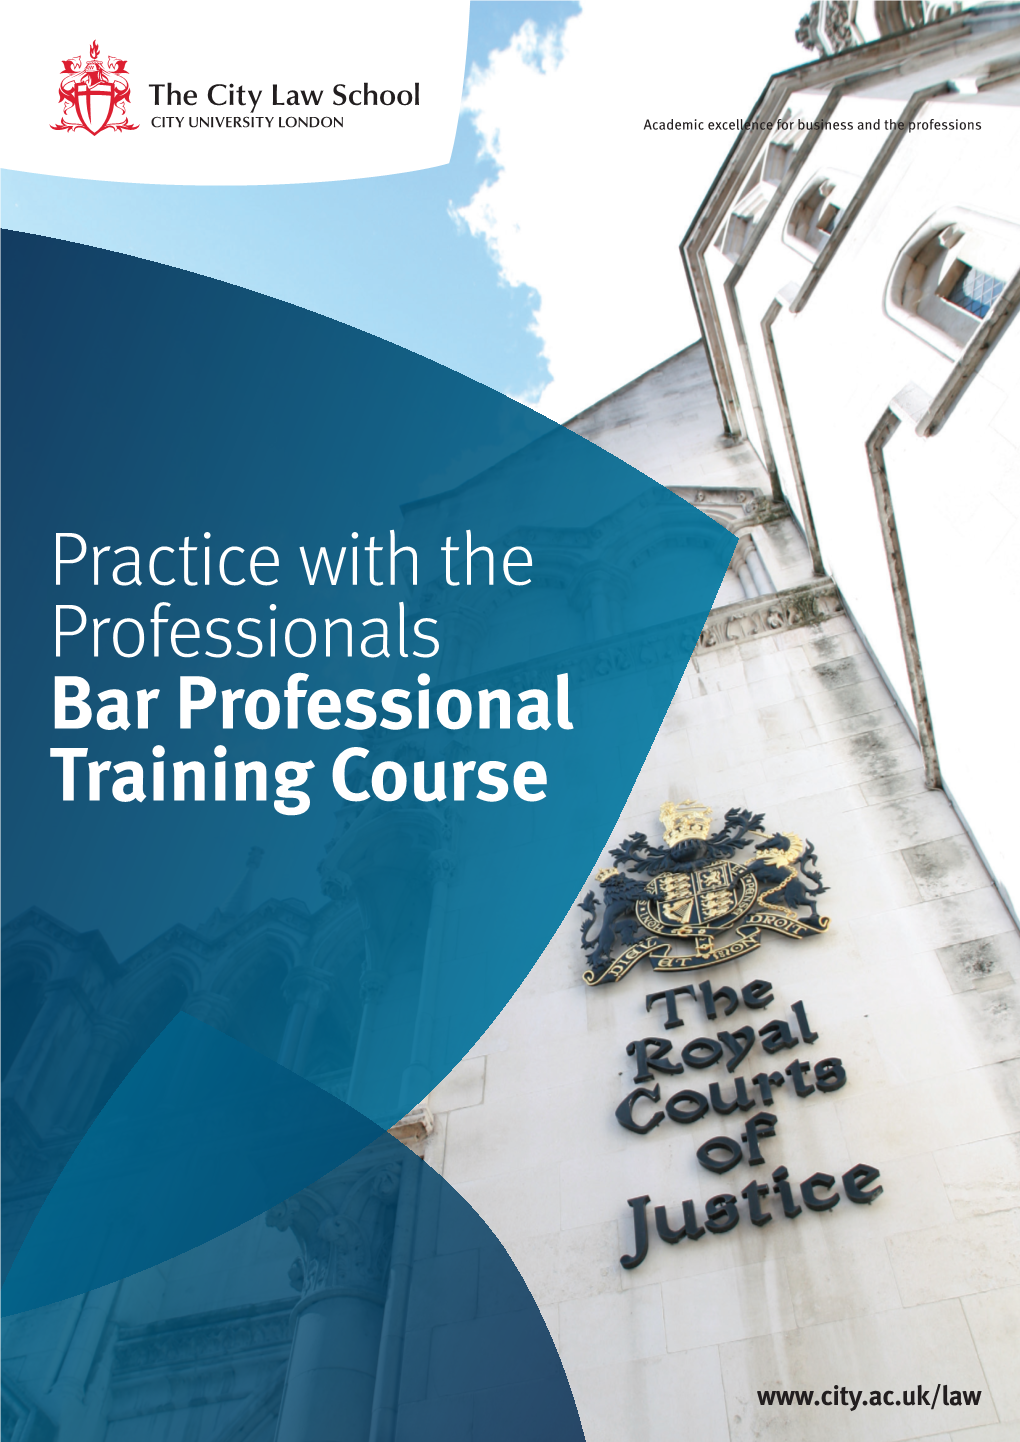 Practice with the Professionals Bar Professional Training Course